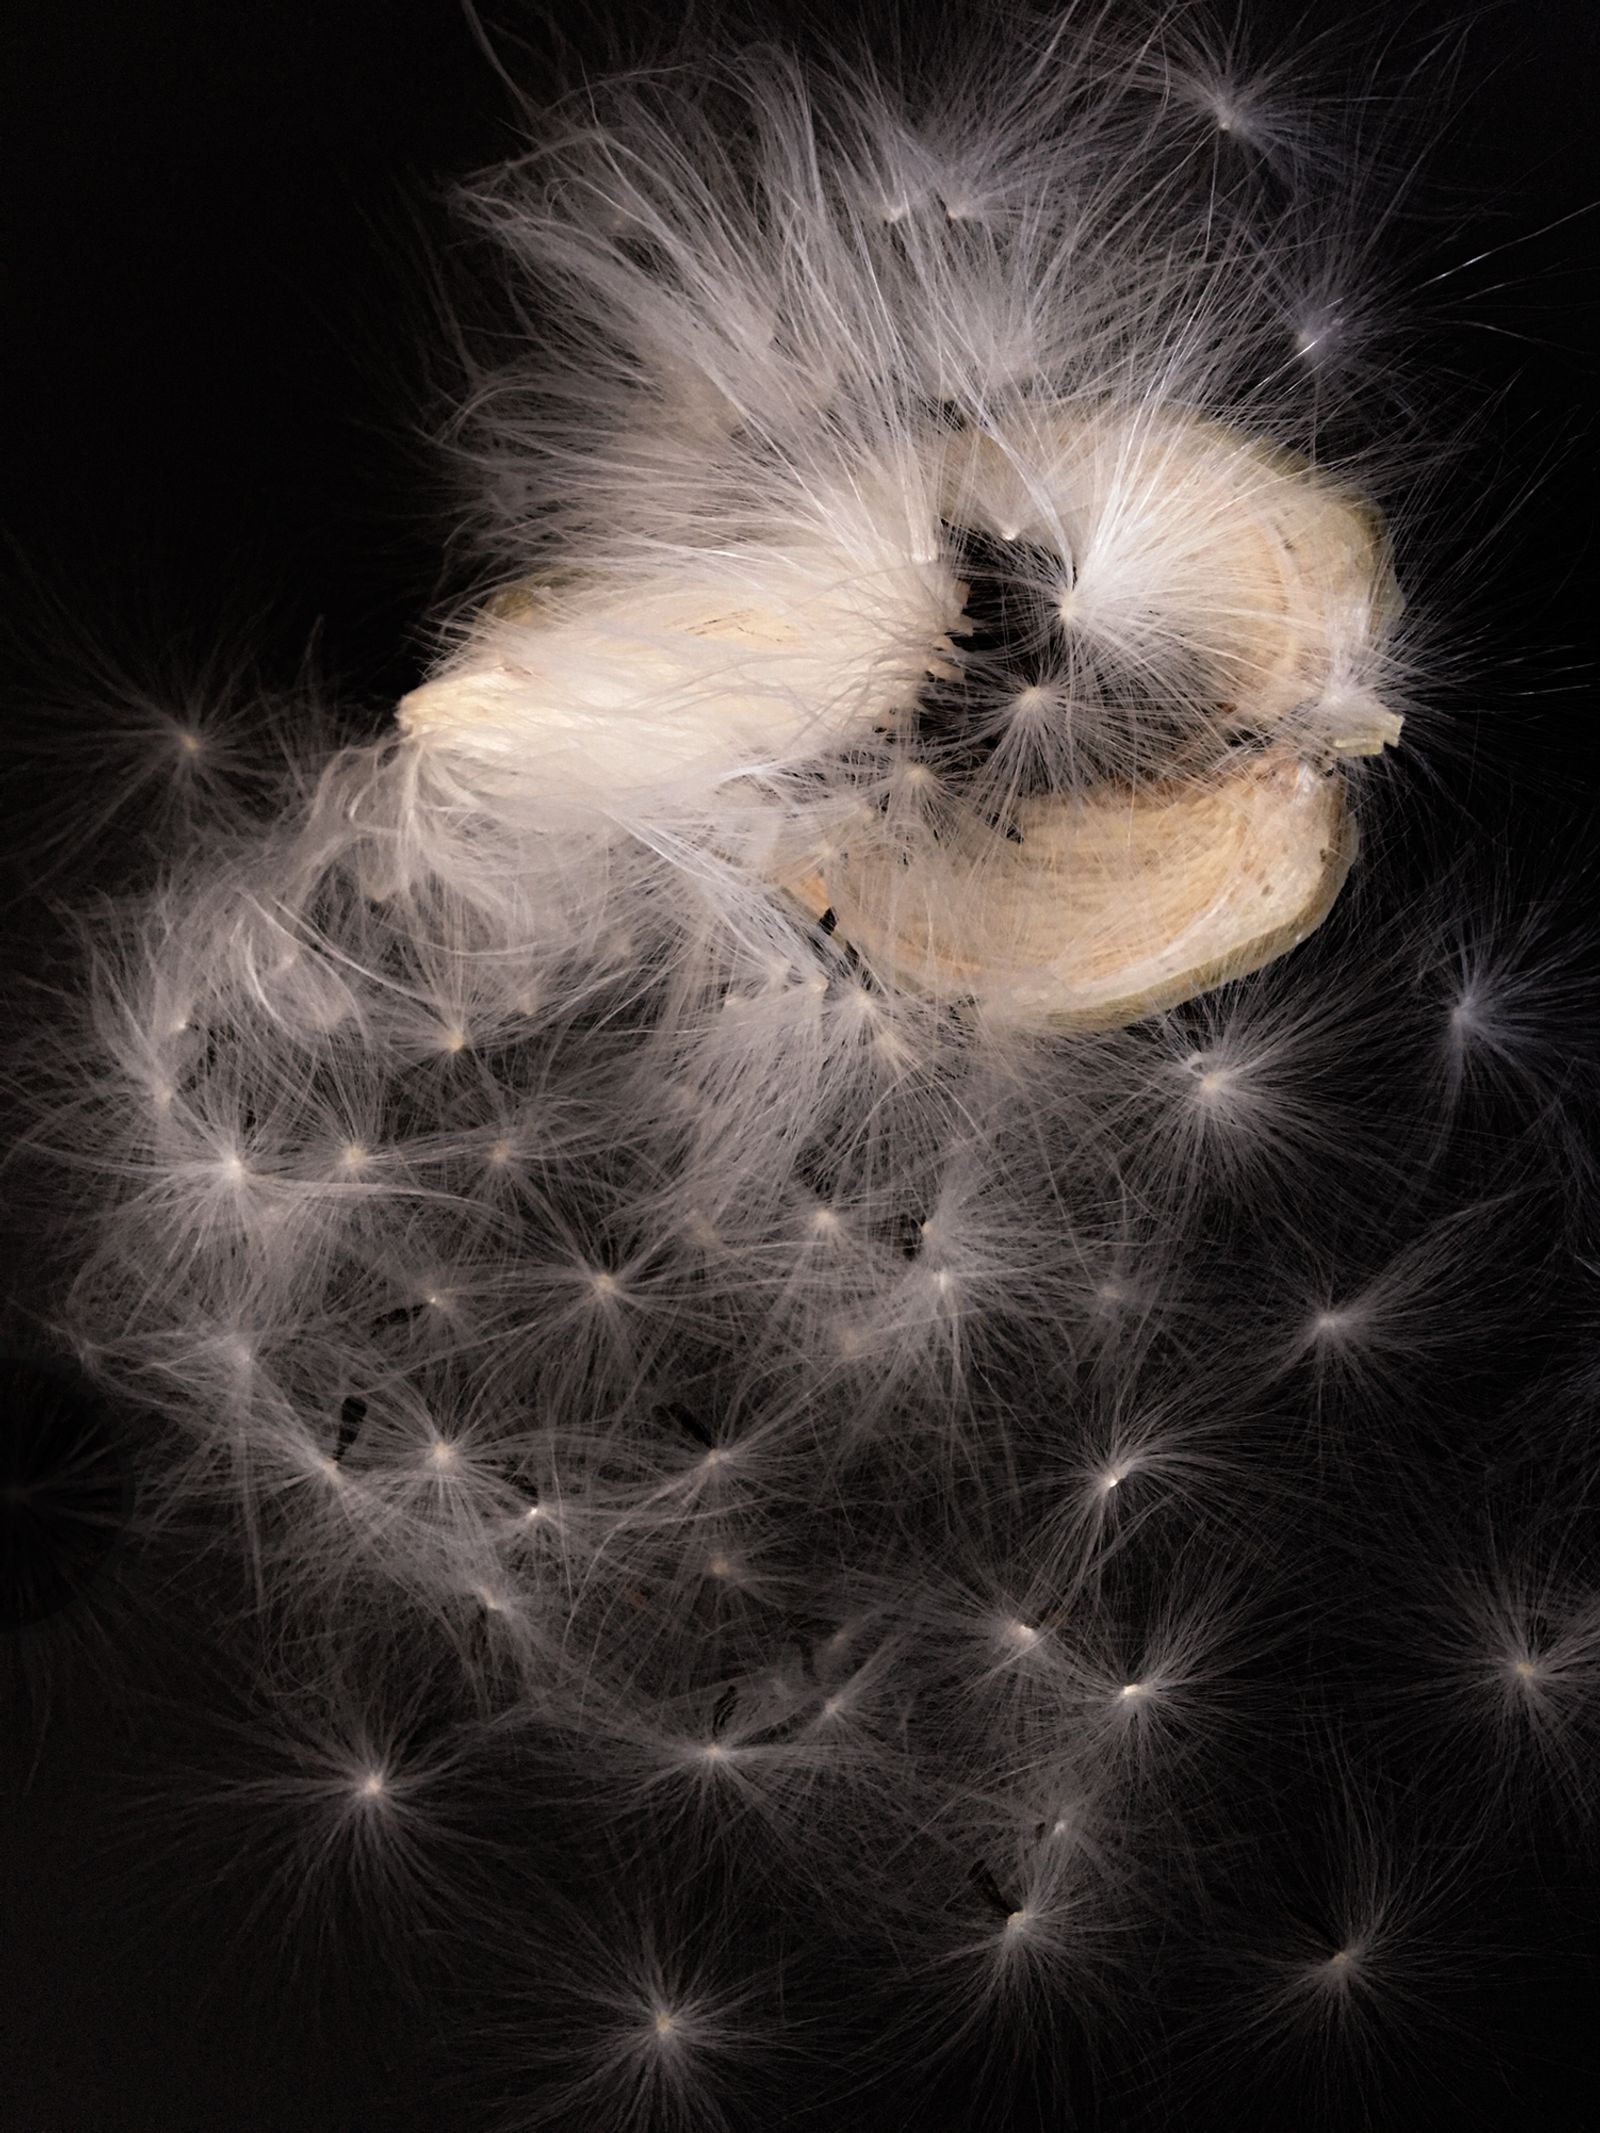 © Bettie Coetzee Lambrecht - Image from the Fairy Flight - Seeding the Sky photography project